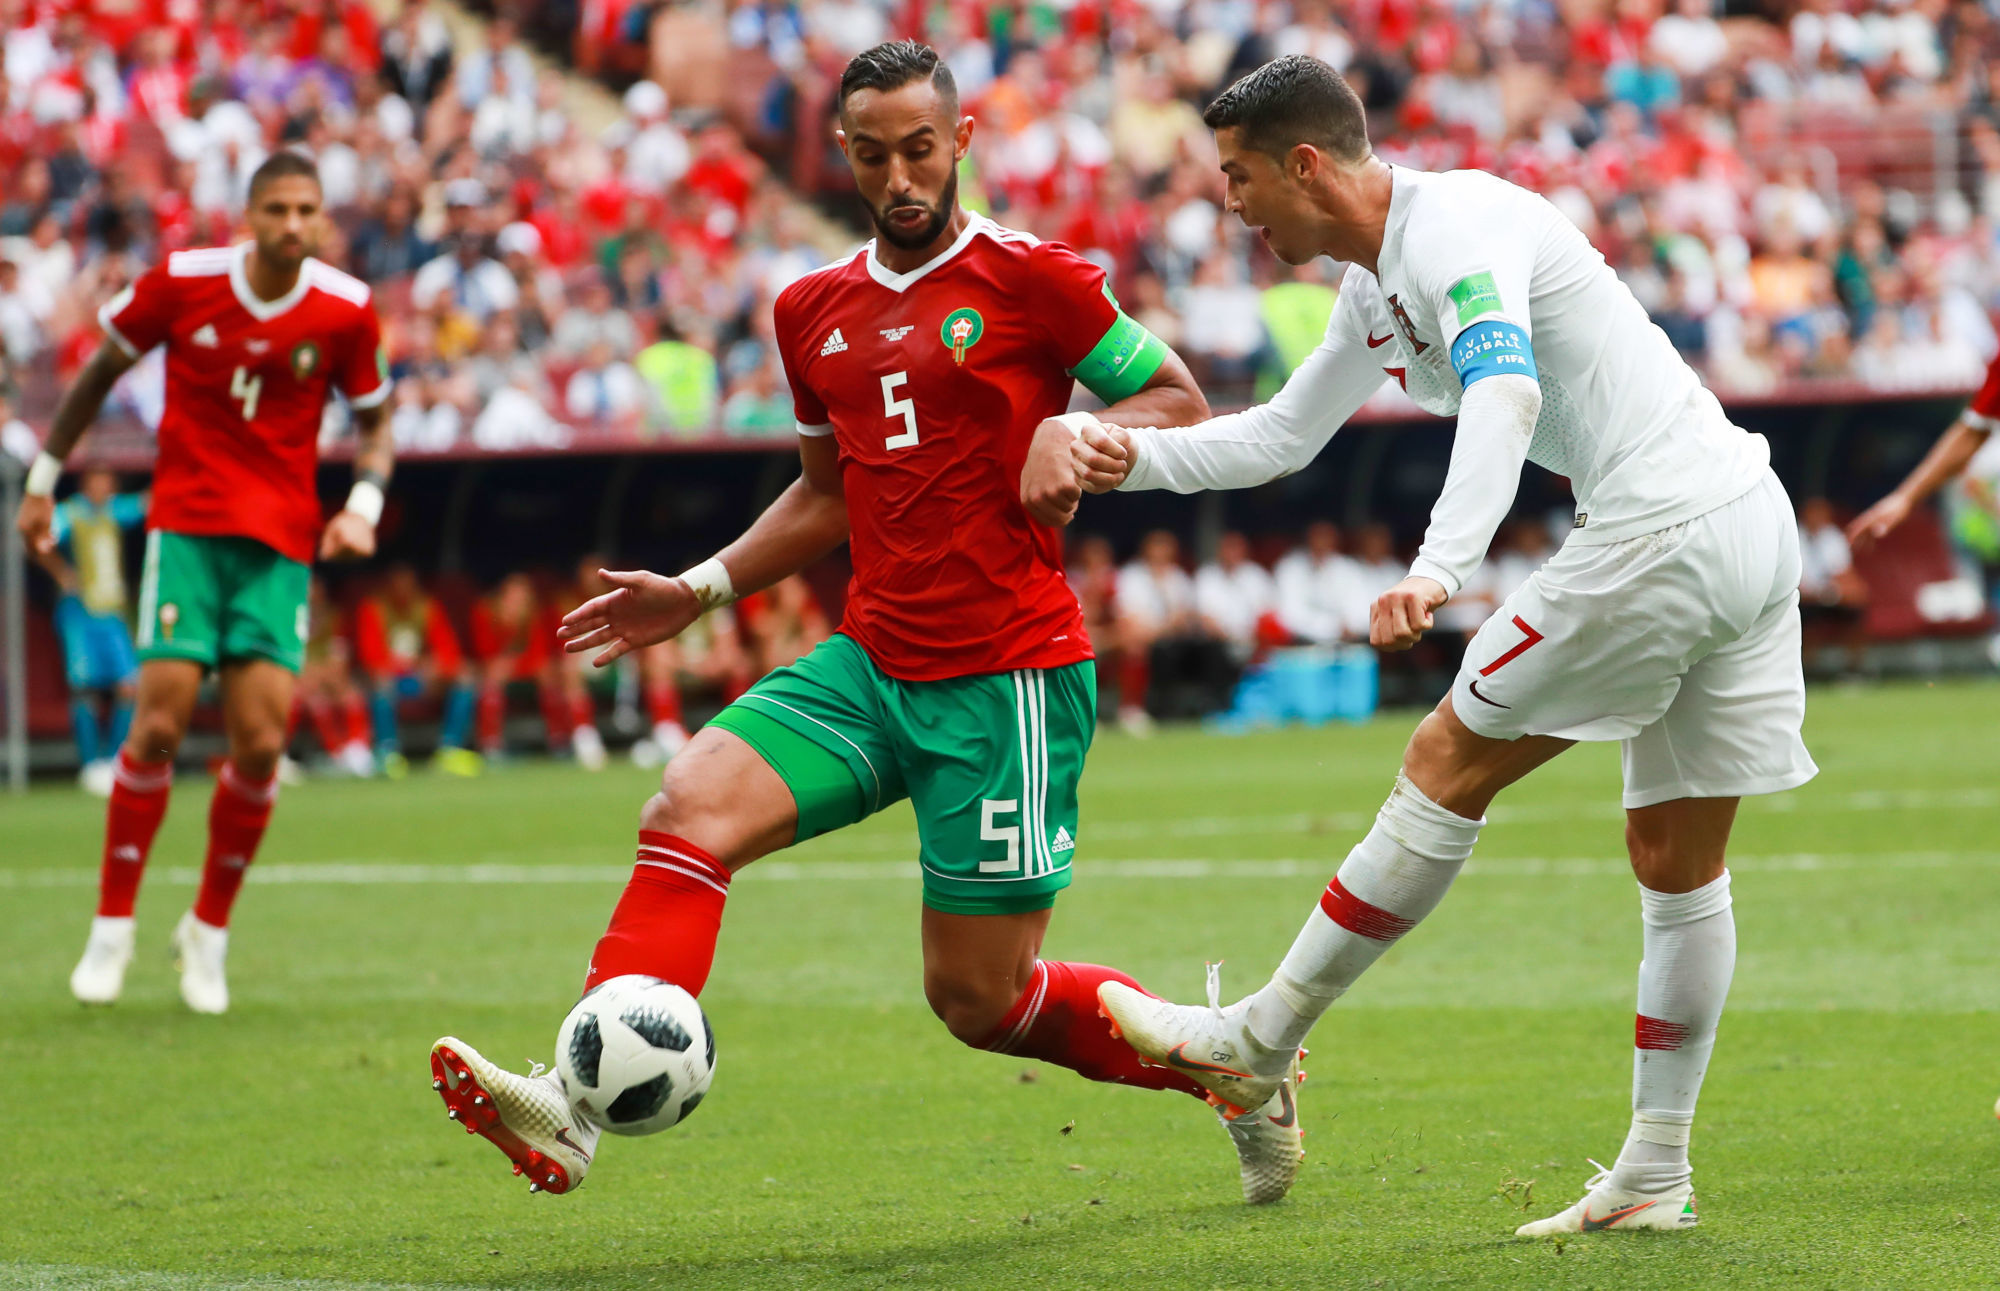 5544881 20.06.2018 Portugal's Cristiano Ronaldo, right, and Morocco's Mehdi Benatia struggle for a ball during the World Cup Group B soccer match between Portugal and Morocco at the Luzhniki stadium, in Moscow, Russia, June 20, 2018. Vitaliy Belousov / Sputnik / Icon Sport